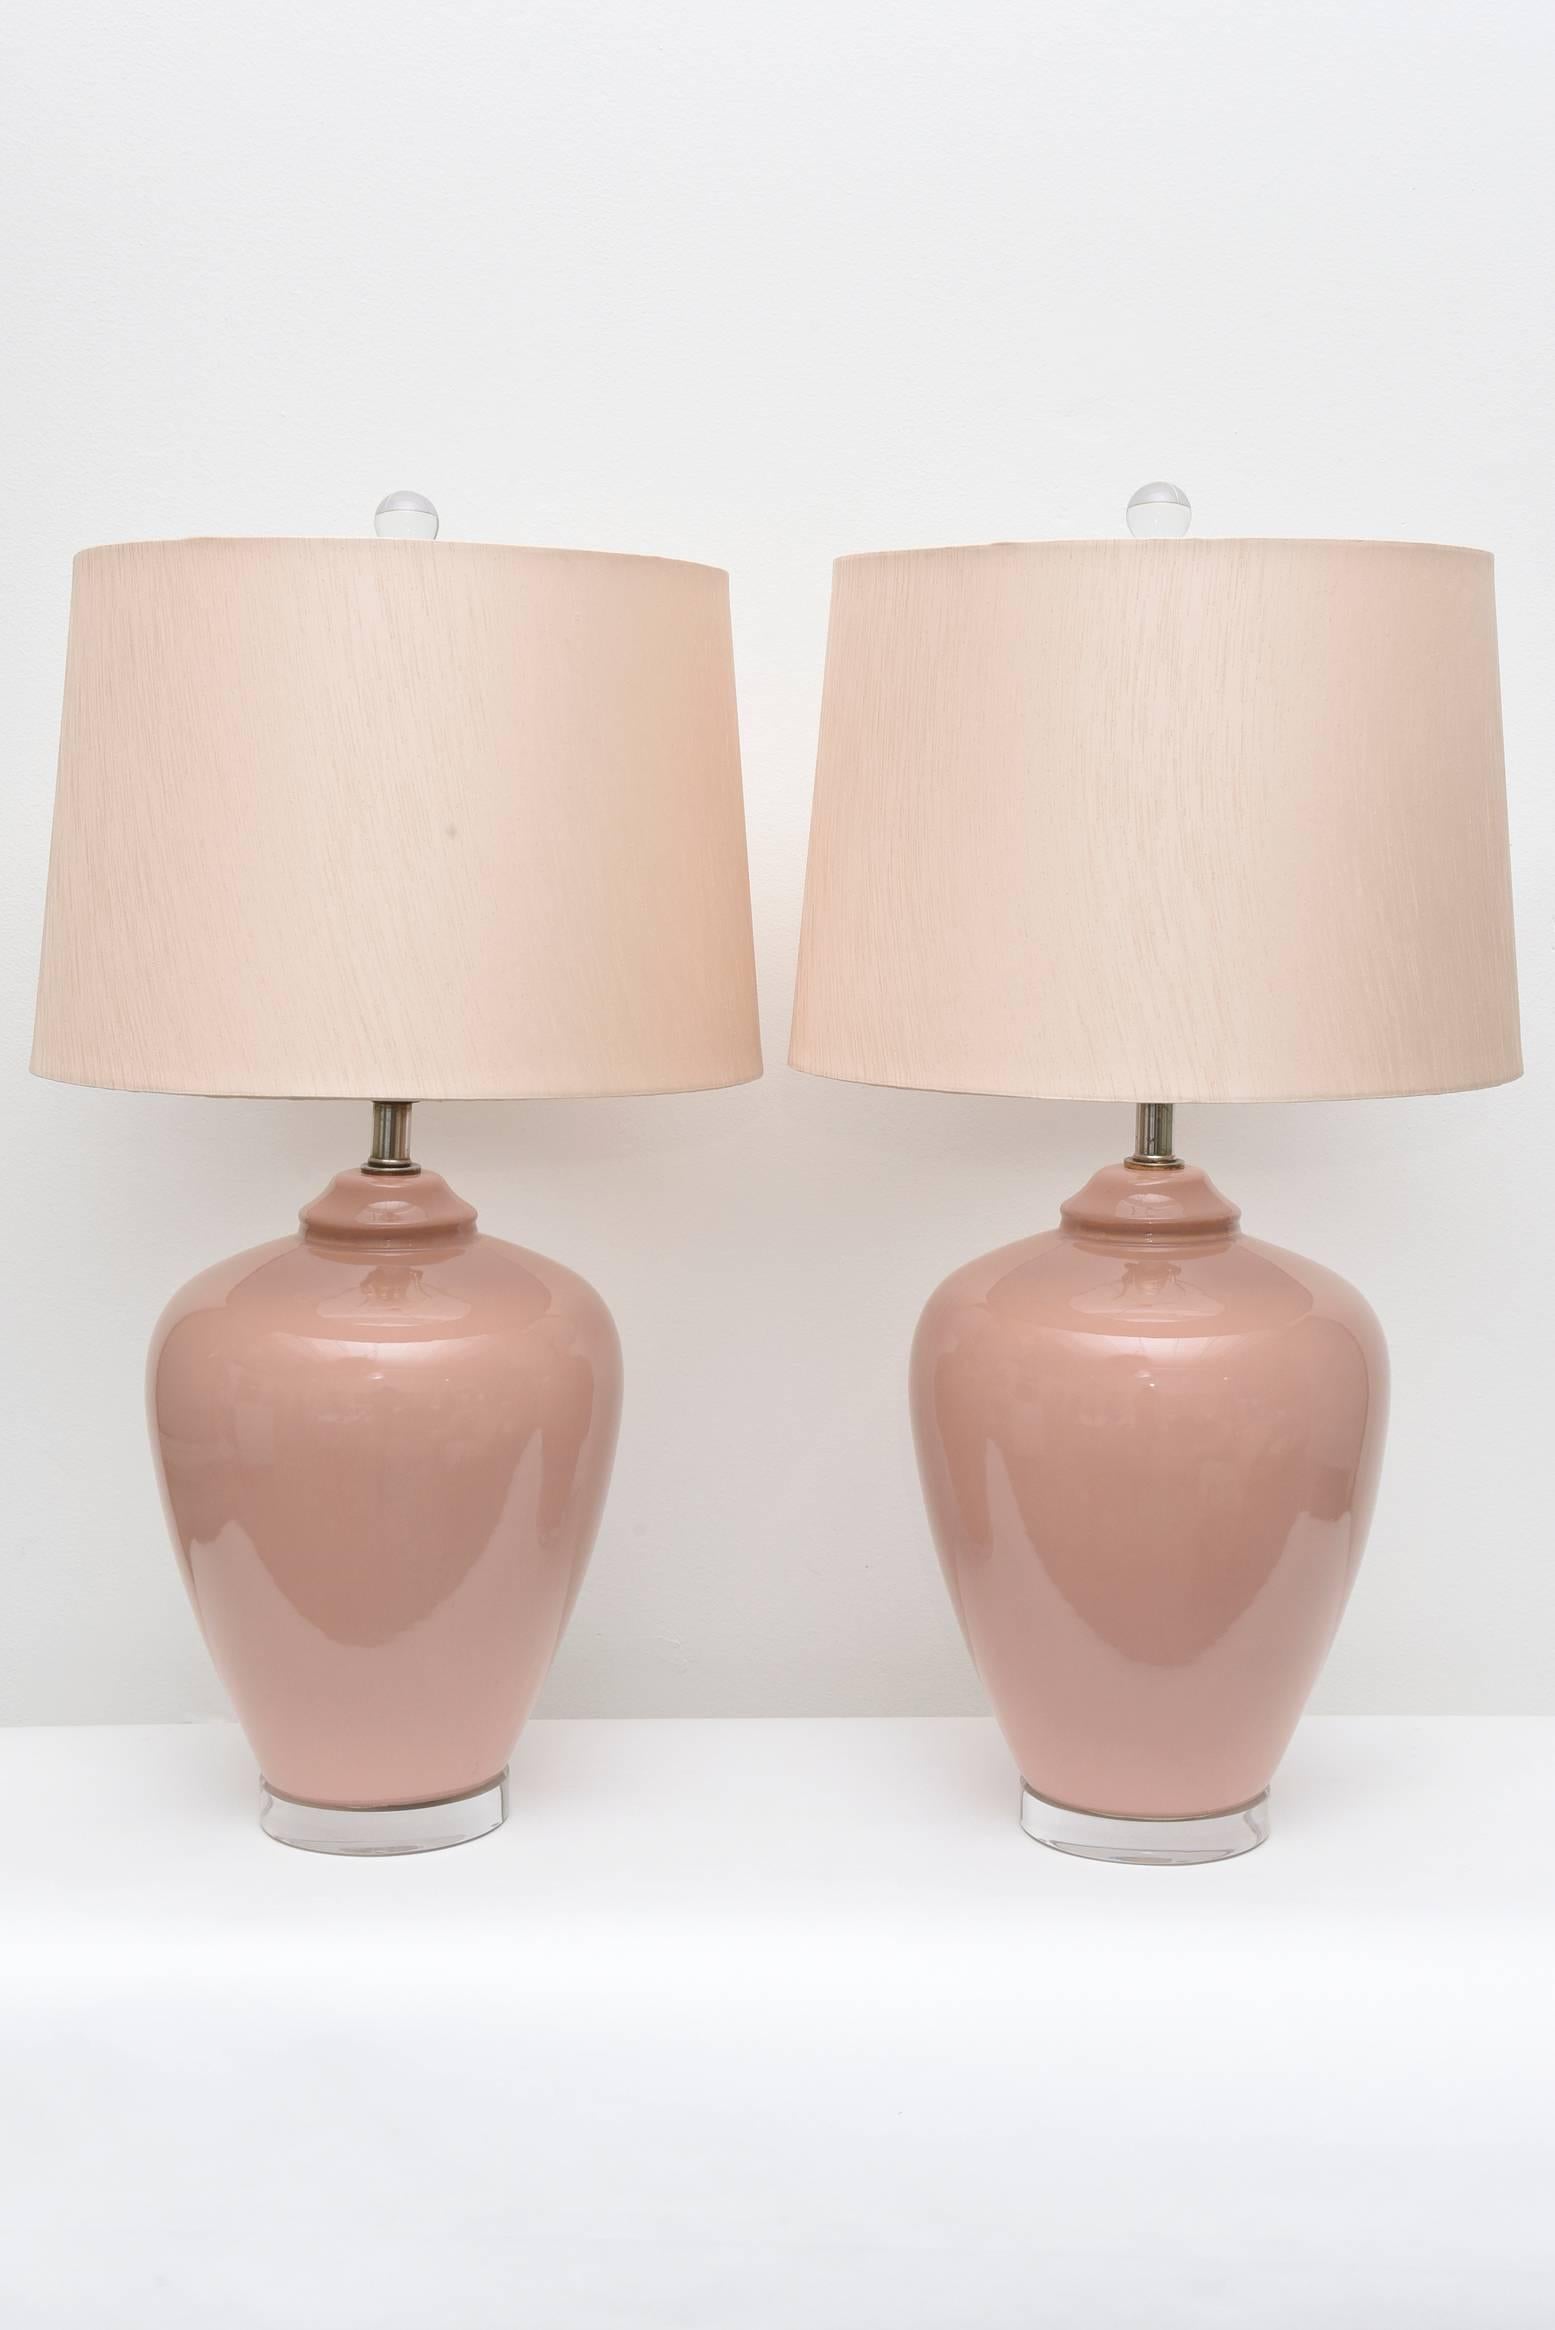 Pair of vintage pink Italian ceramic table lamps. Classic urn shape in a lovely pink color. Recently rewired for US standards. Refinished with a clear Lucite base.